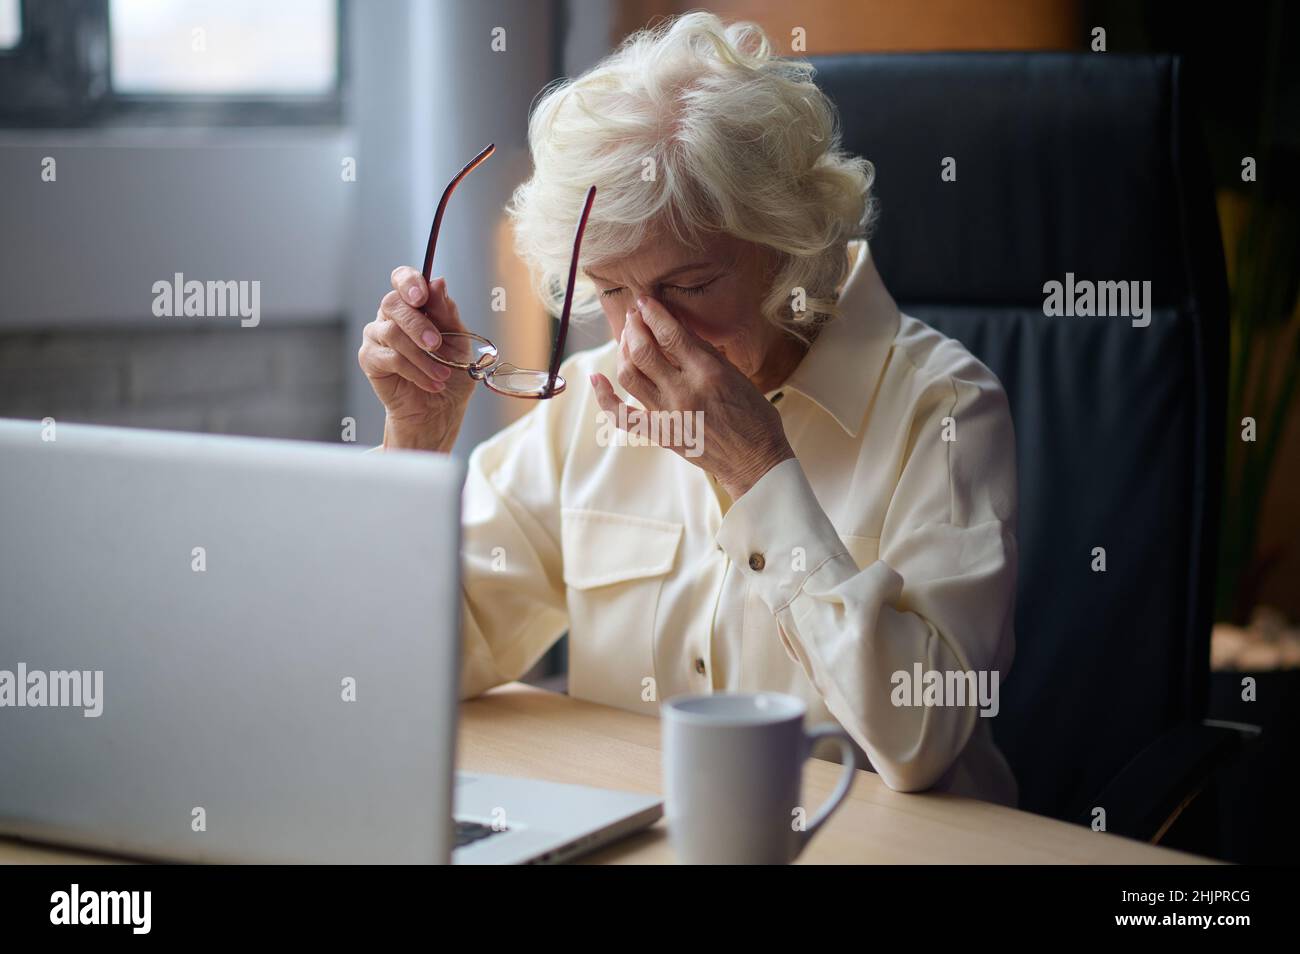 Woman taking off glasses touching her closed eyes Stock Photo